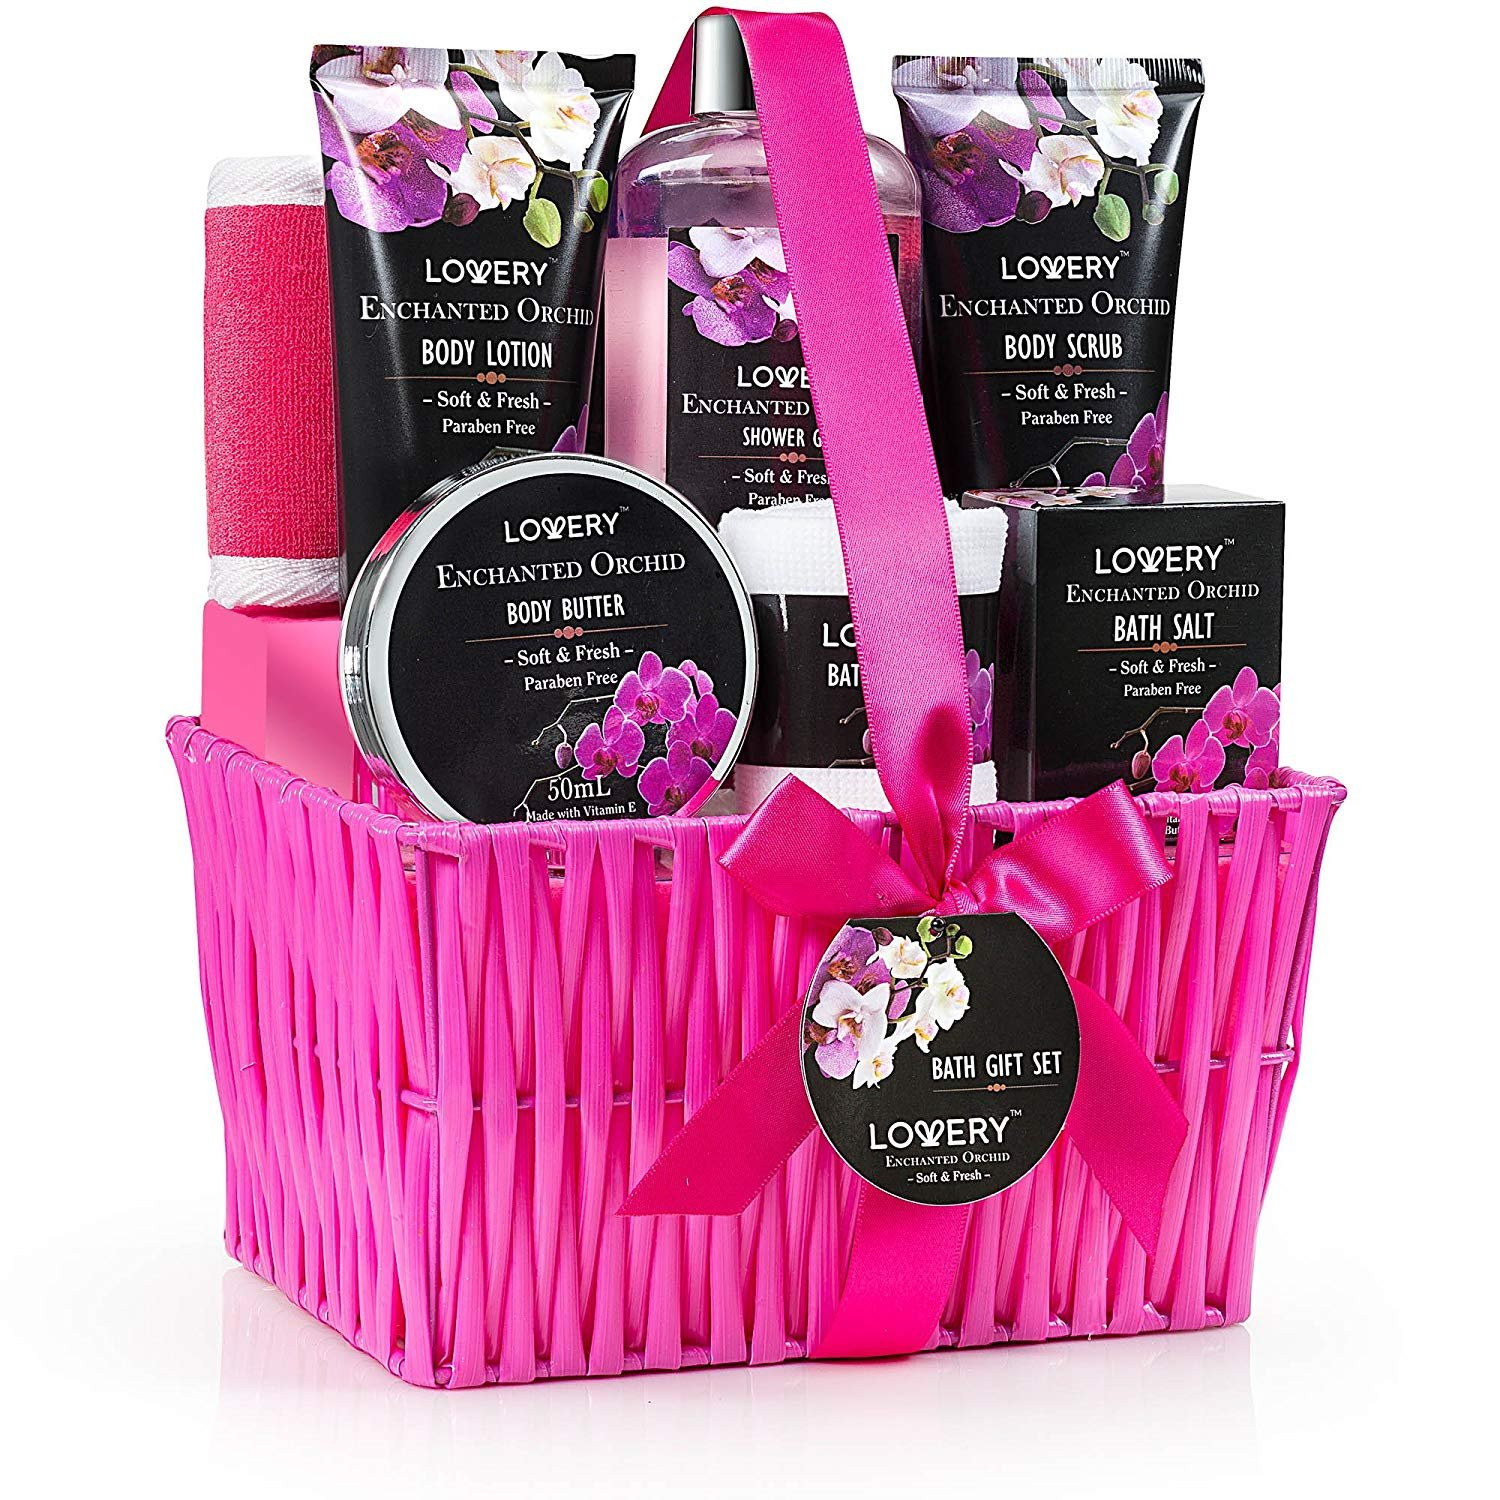 Gift Baskets Ideas For Her
 Gift Baskets for Women Lovery Spa Gift Set for Her 1